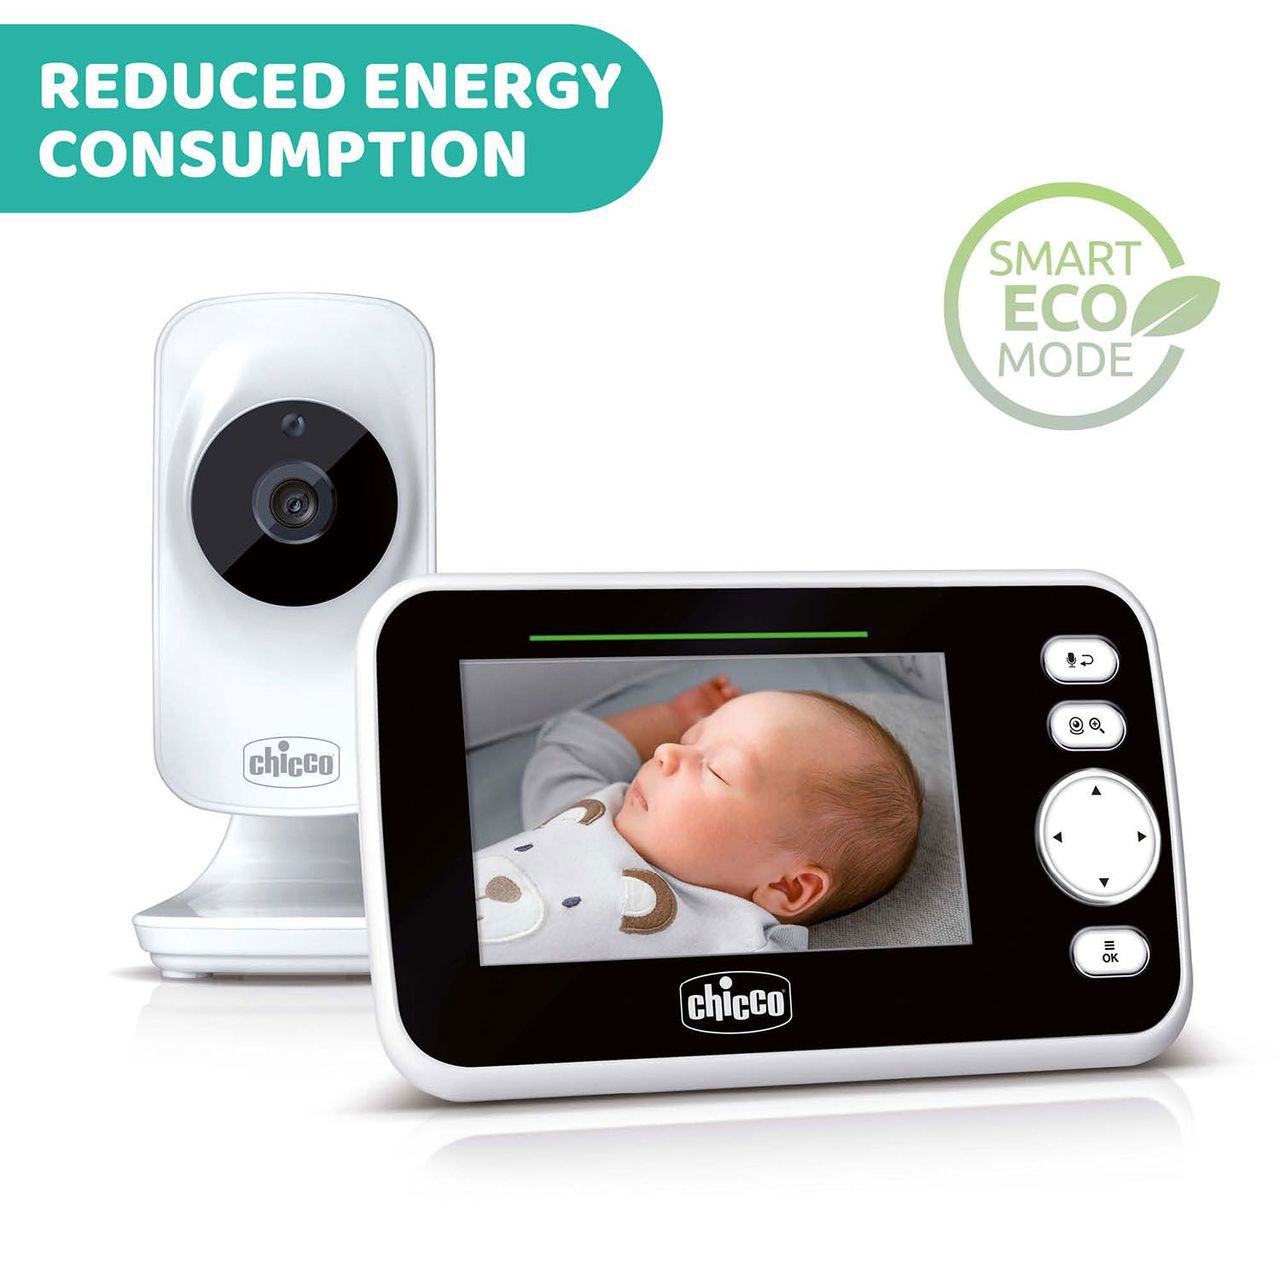 Video Monitor Chicco Deluxe